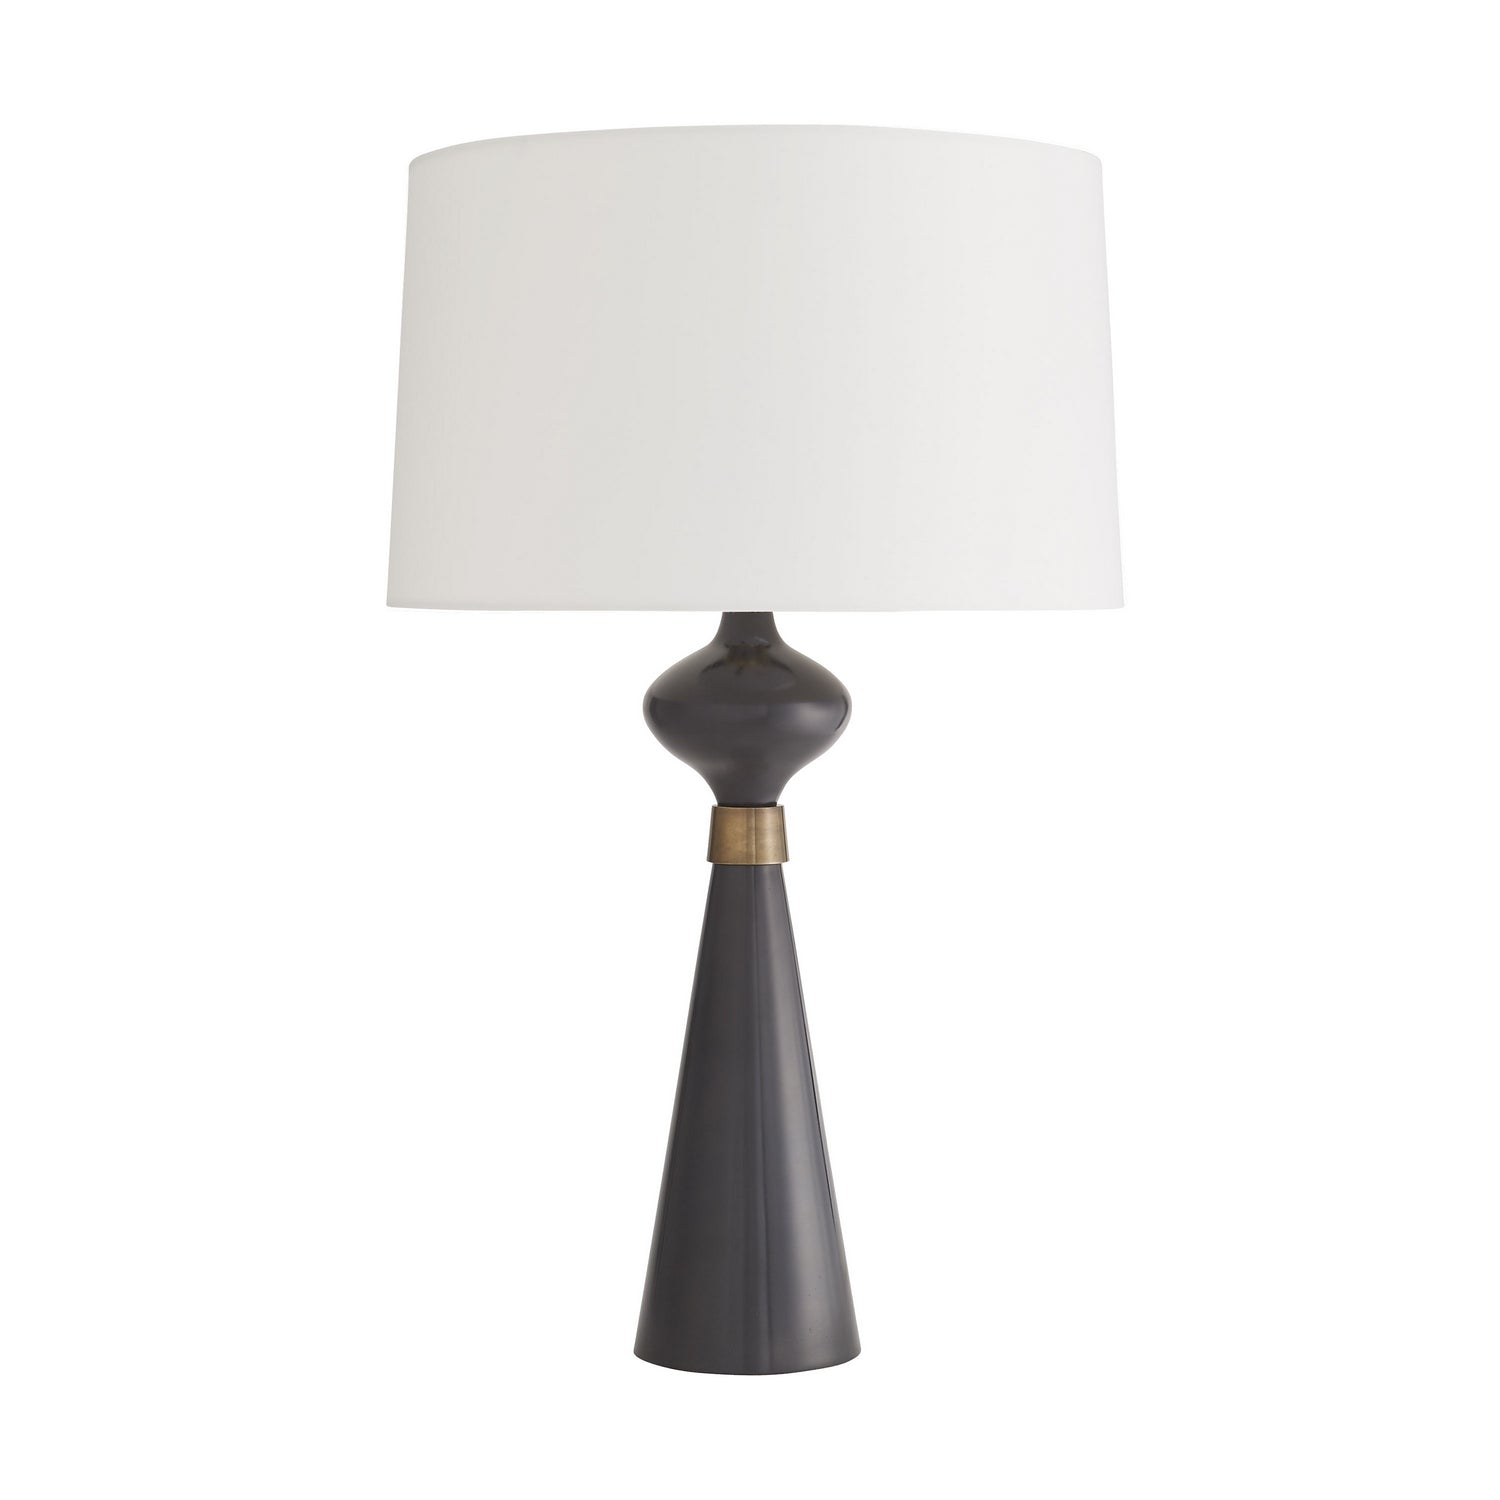 One Light Table Lamp from the Evette collection in Bronze finish